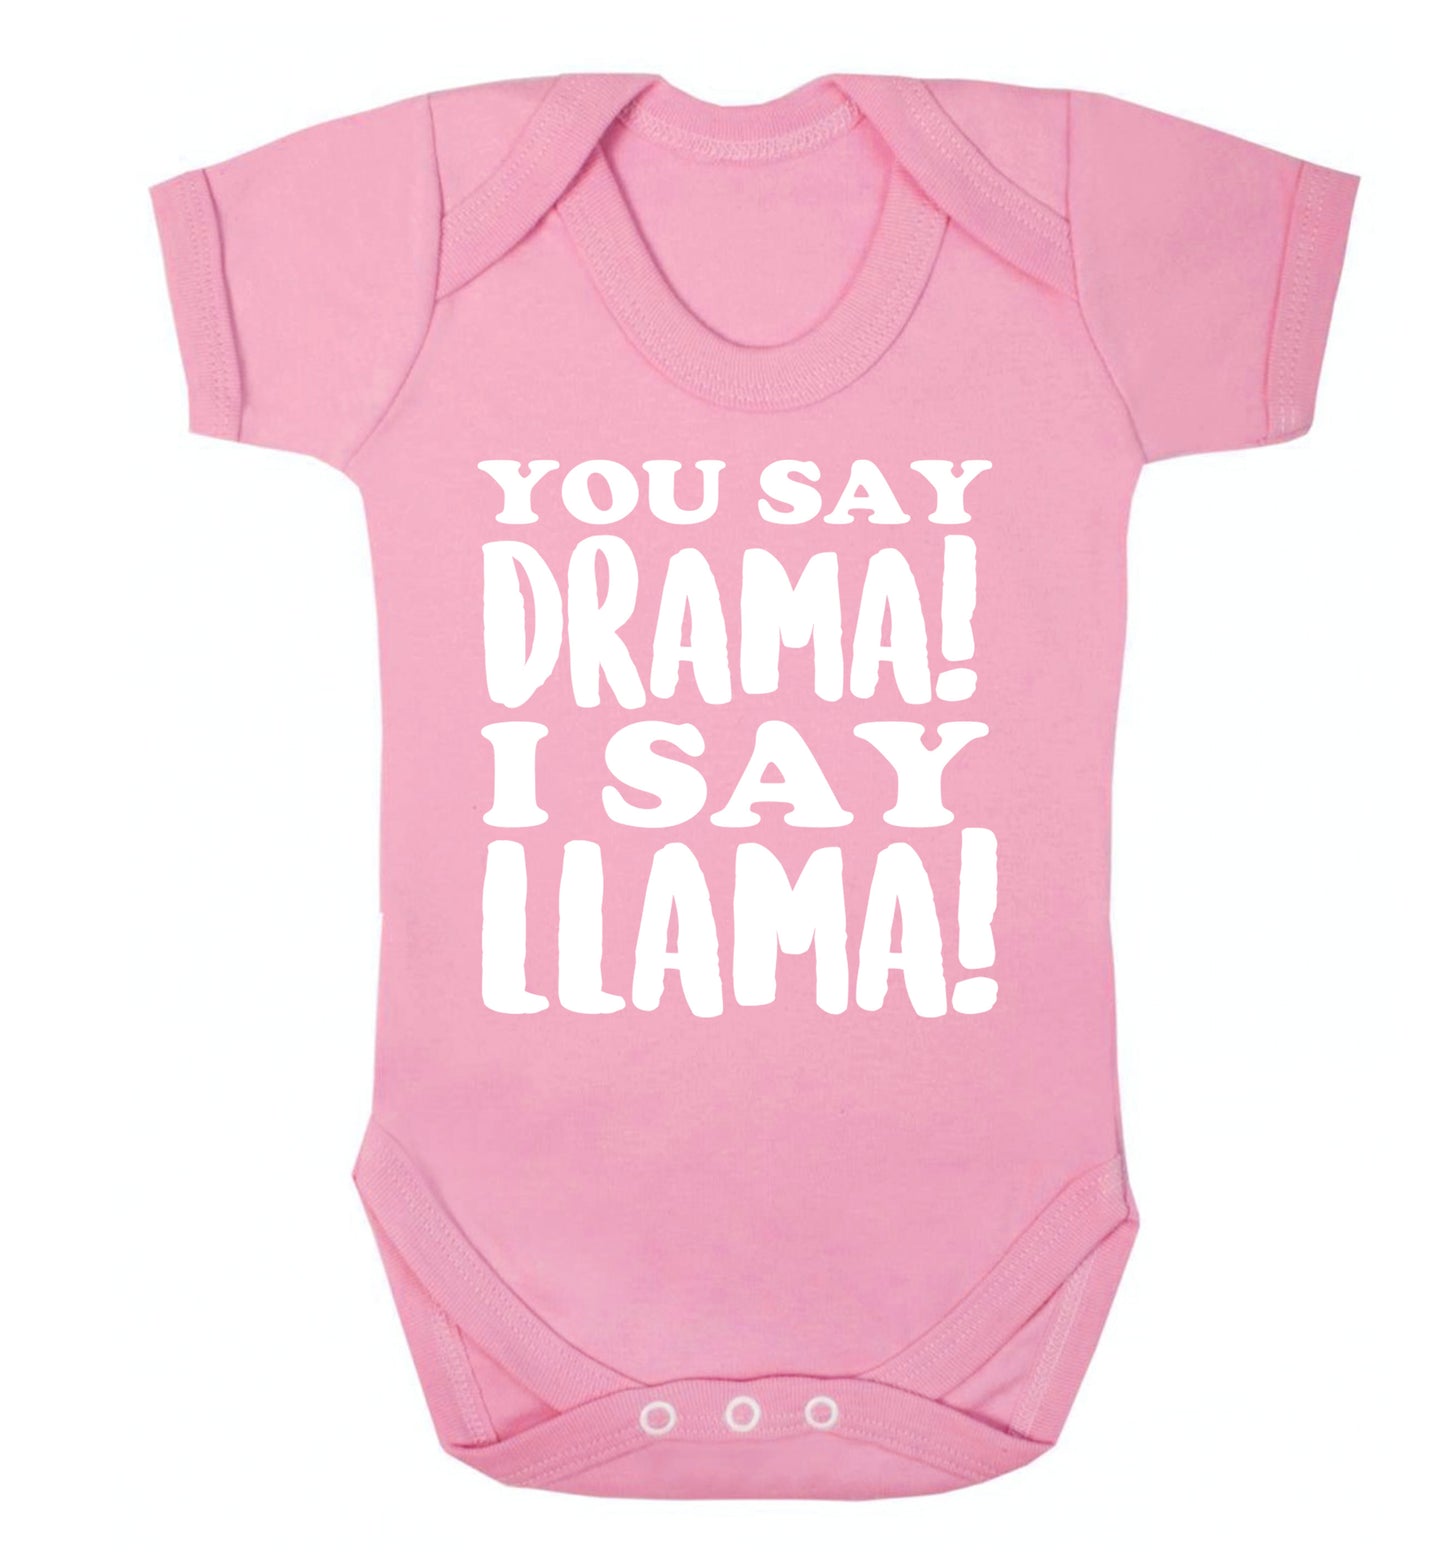 You say drama I say llama! Baby Vest pale pink 18-24 months